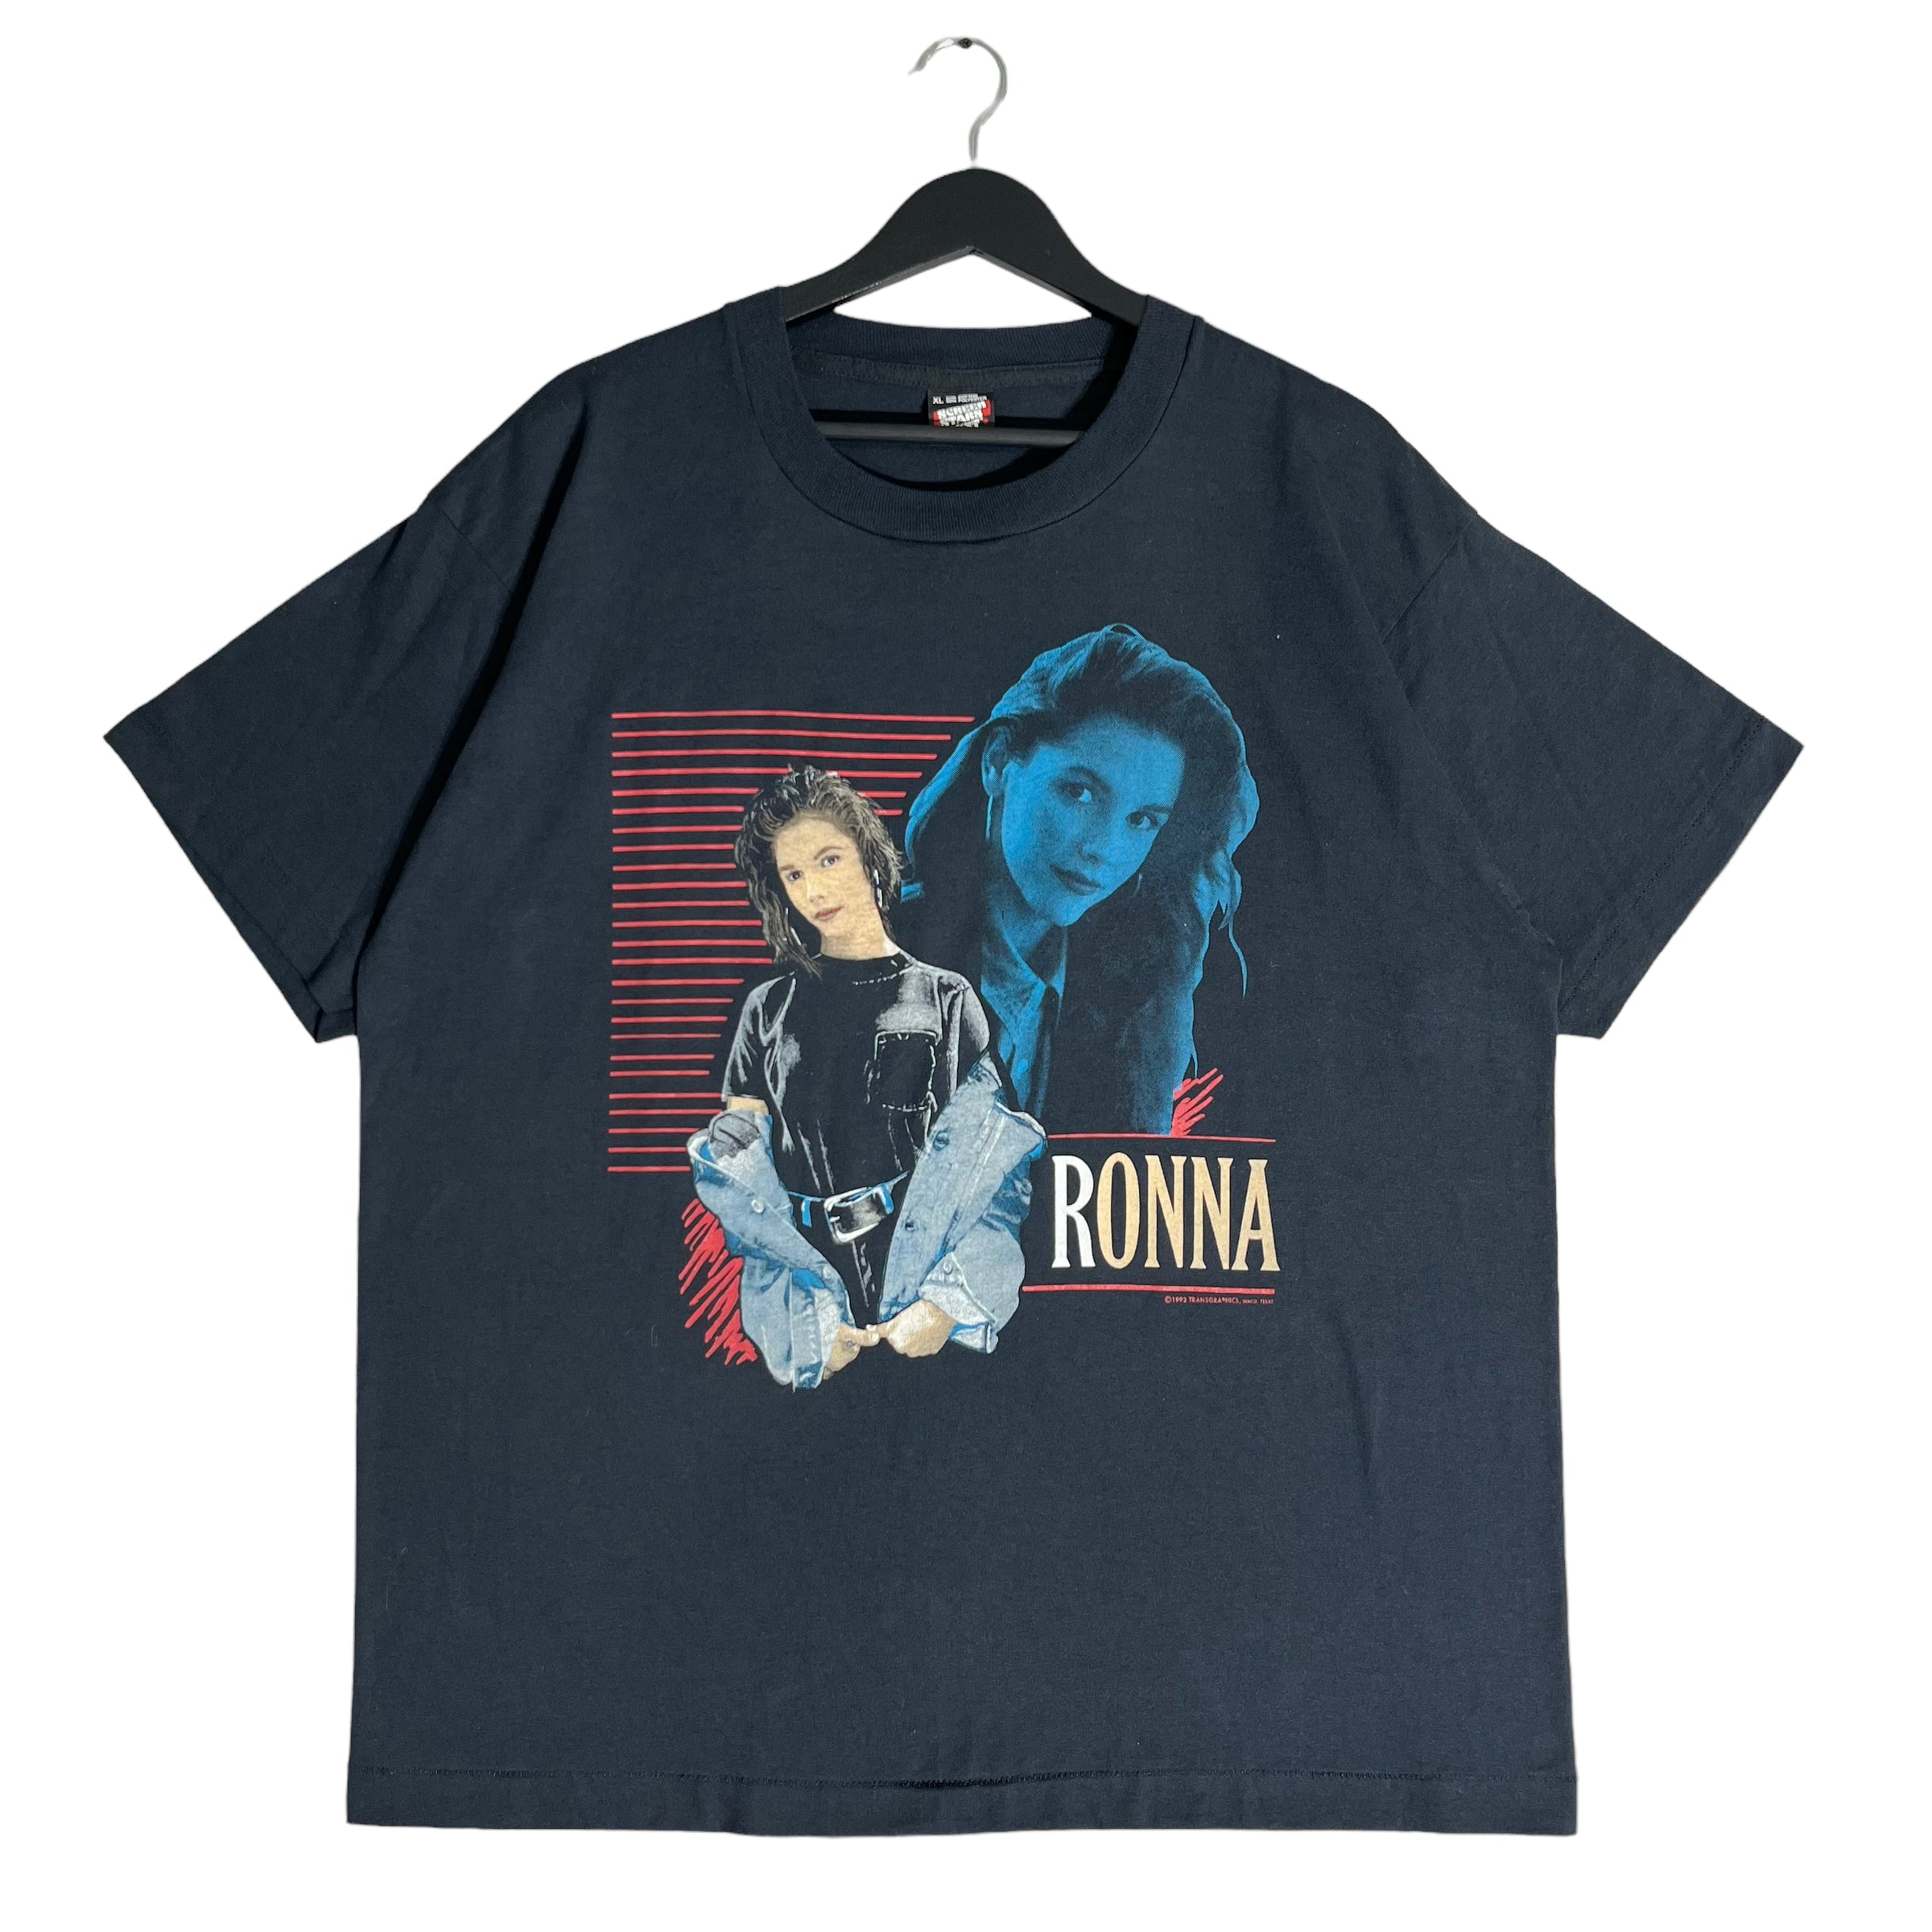 Vintage Ronna Country Singer Tee 1992